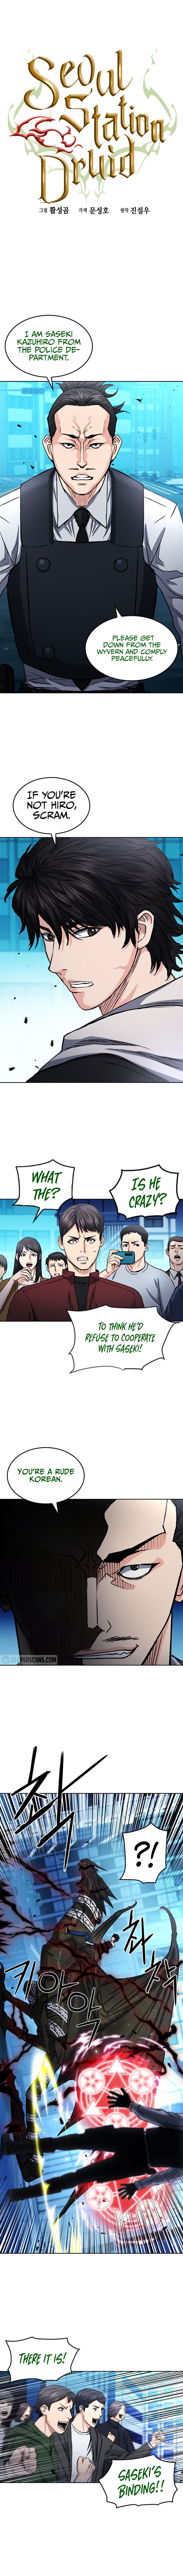 Seoul Station Druid - Chapter 68 Page 2